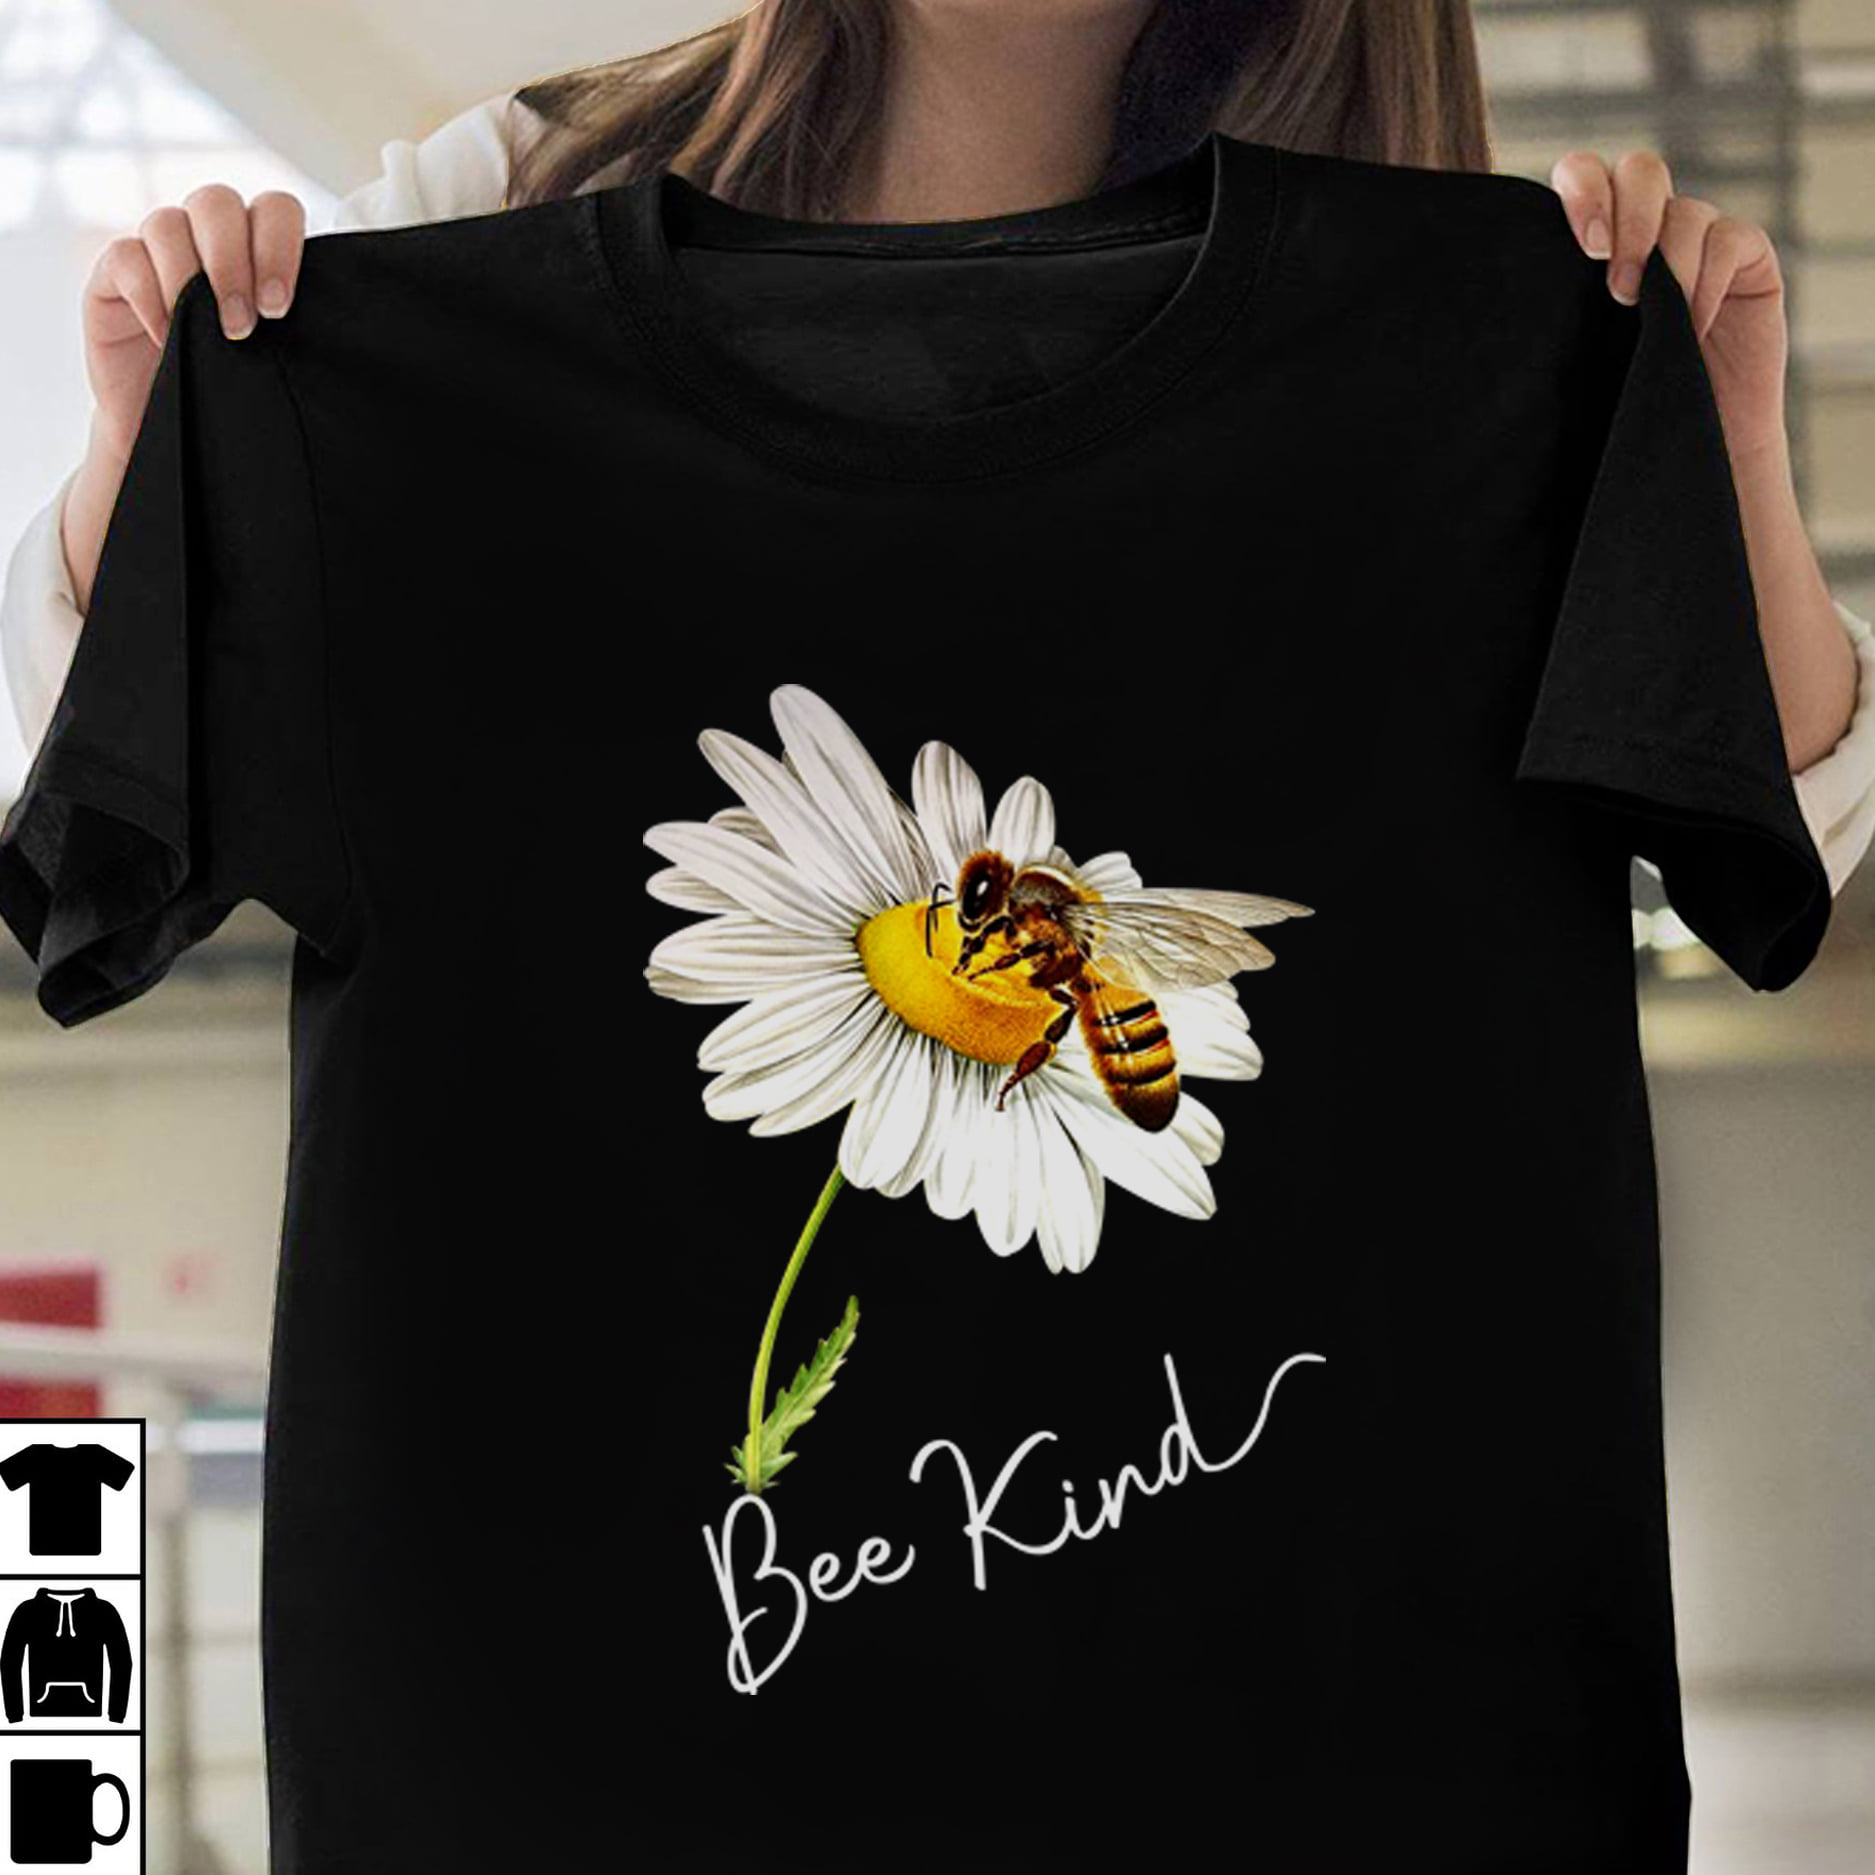 Bee kind - Be kind in world, bee and flower